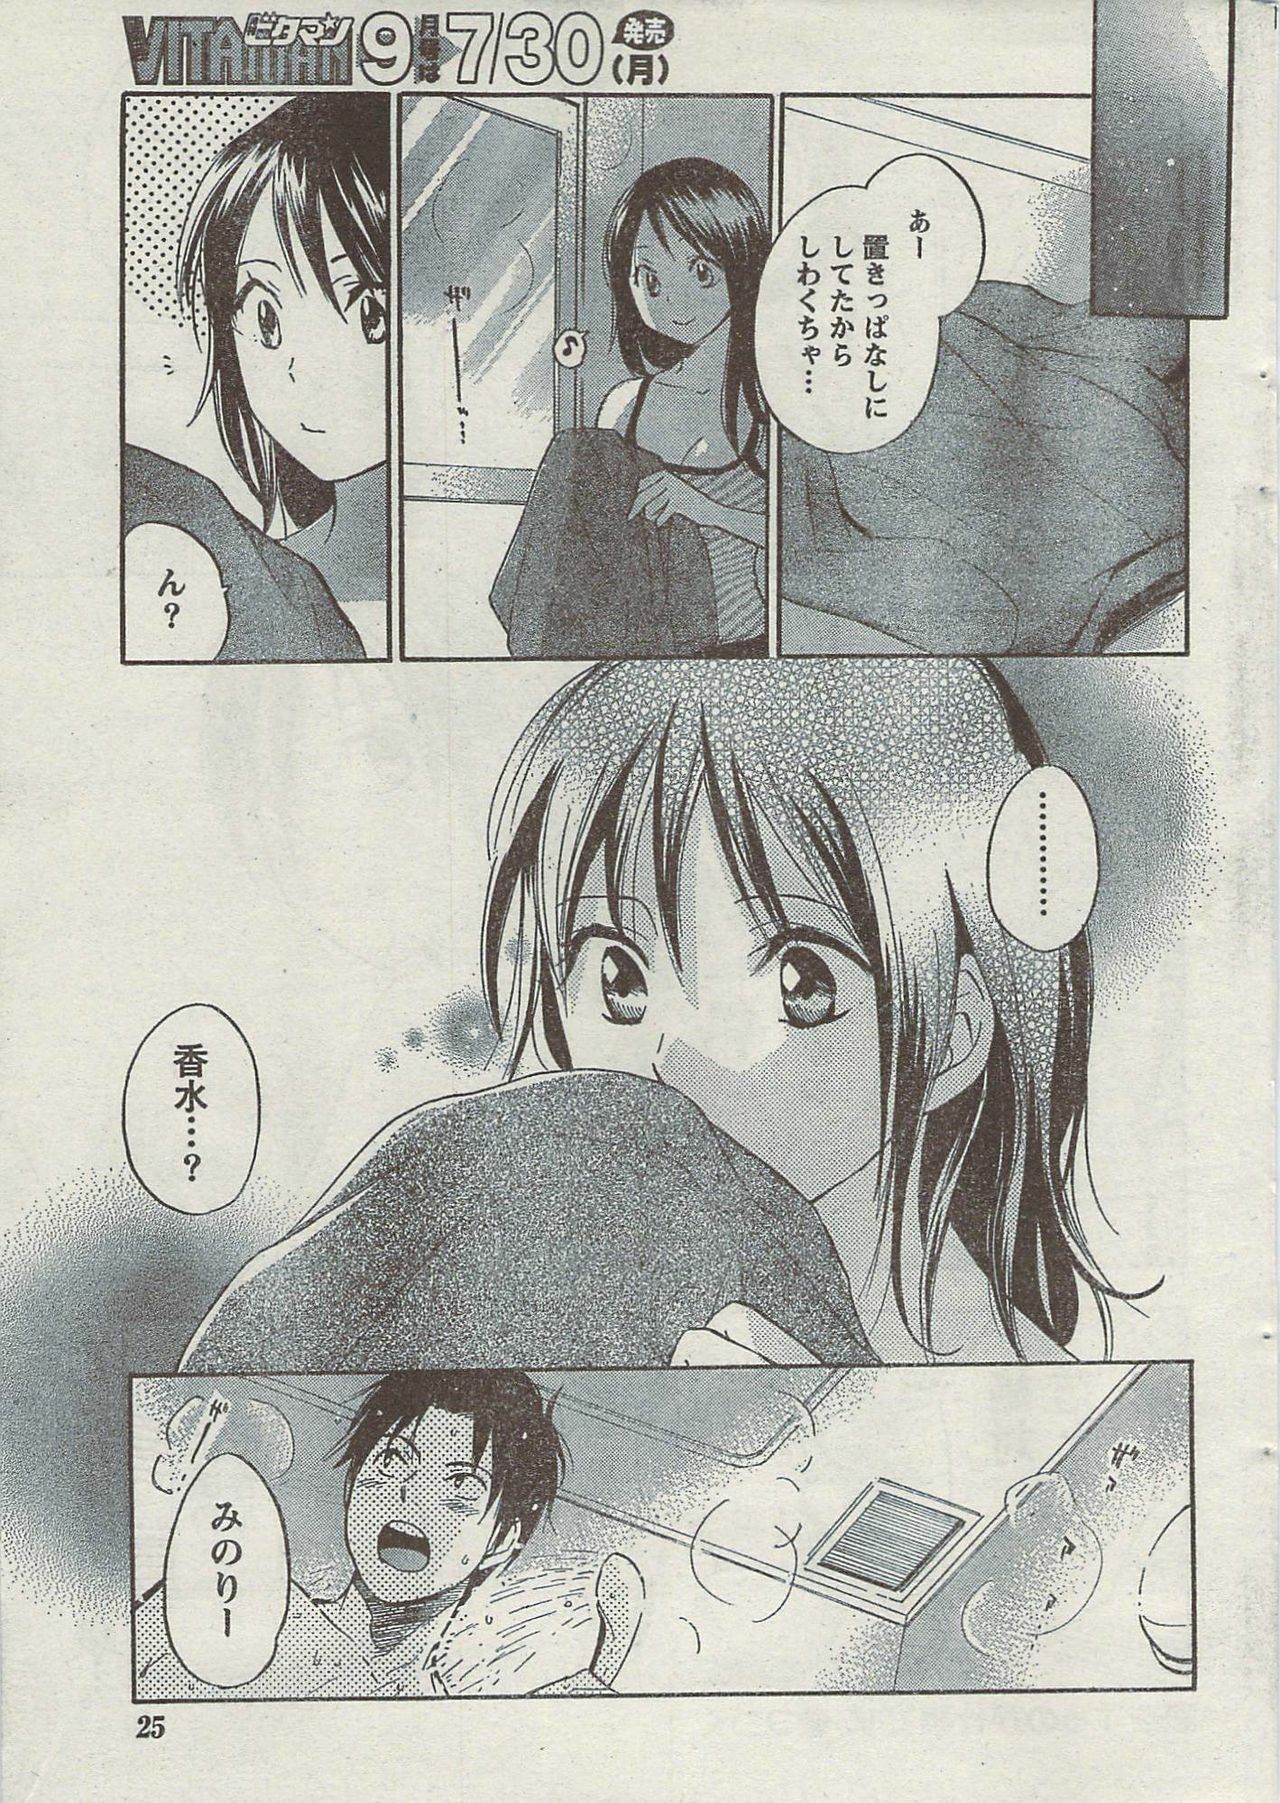 Monthly Vitaman 2007-08 page 25 full